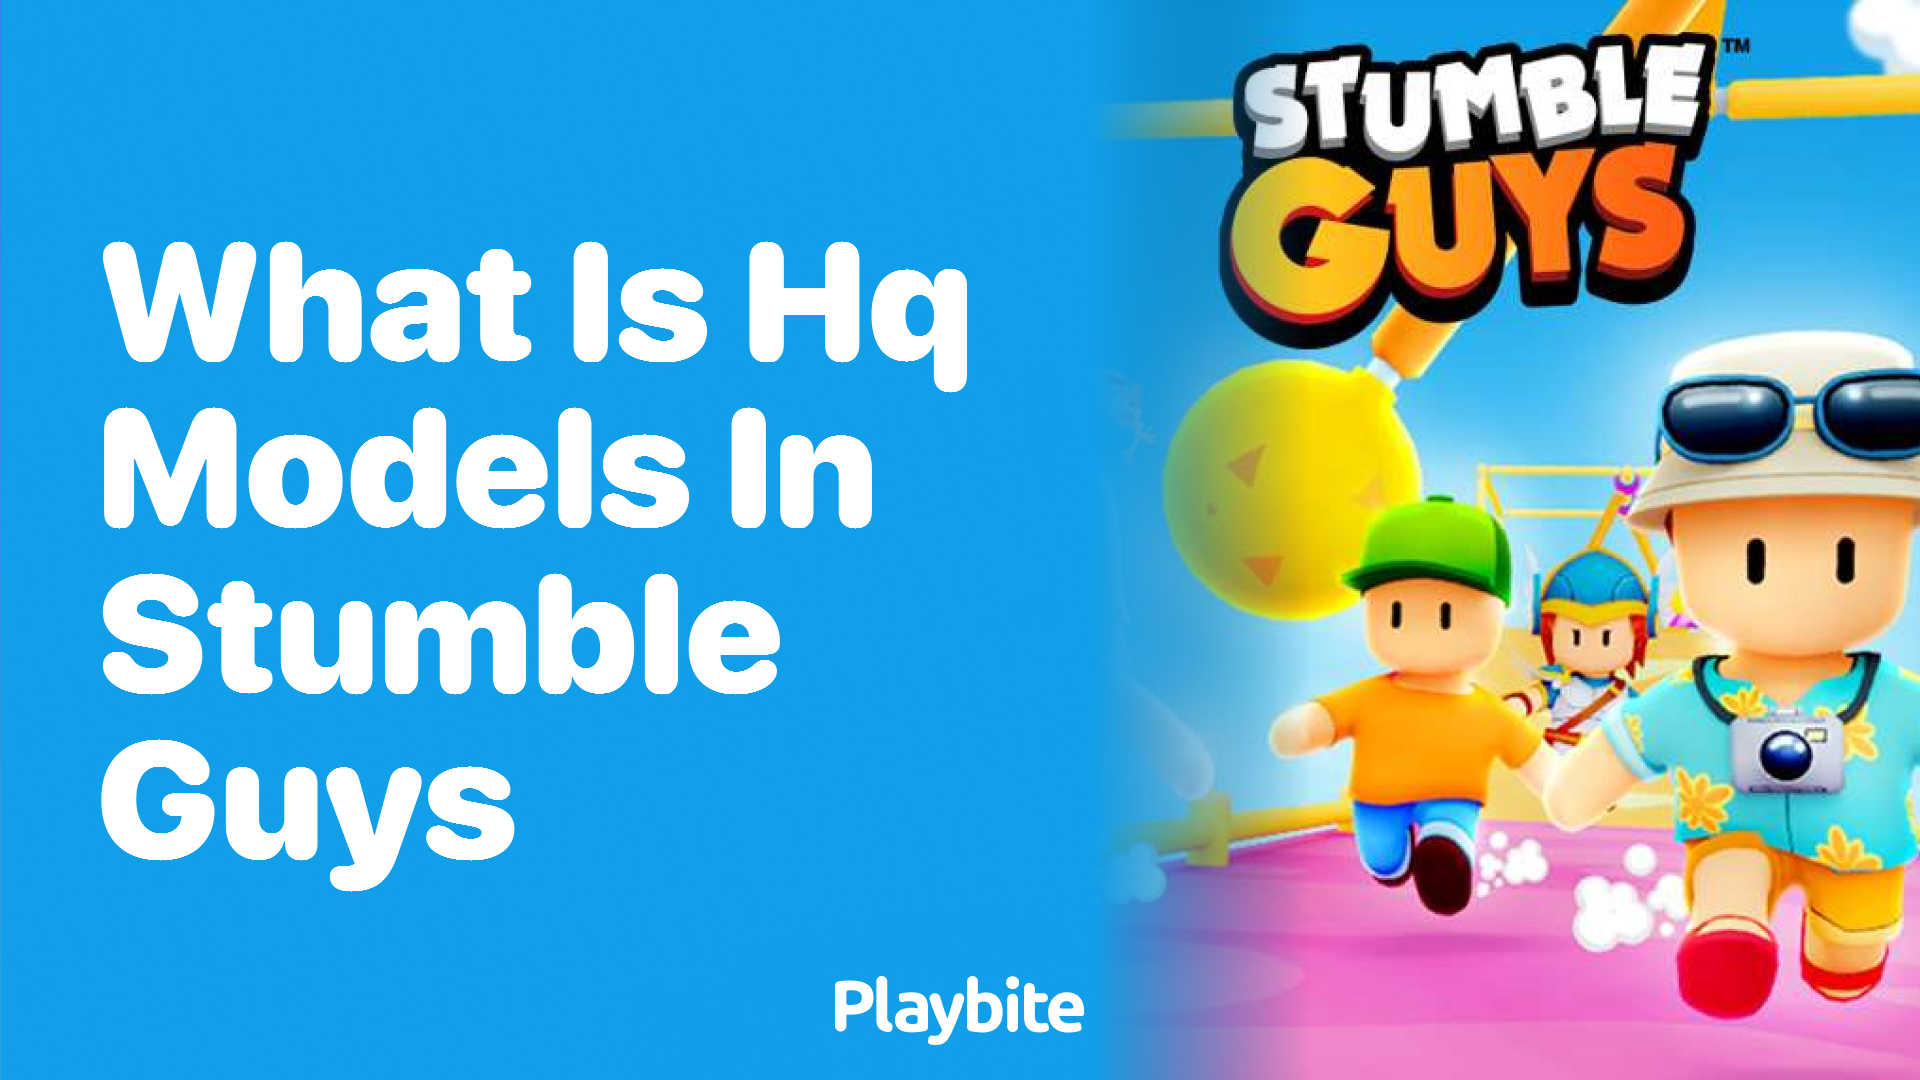 What is HQ Models in Stumble Guys?